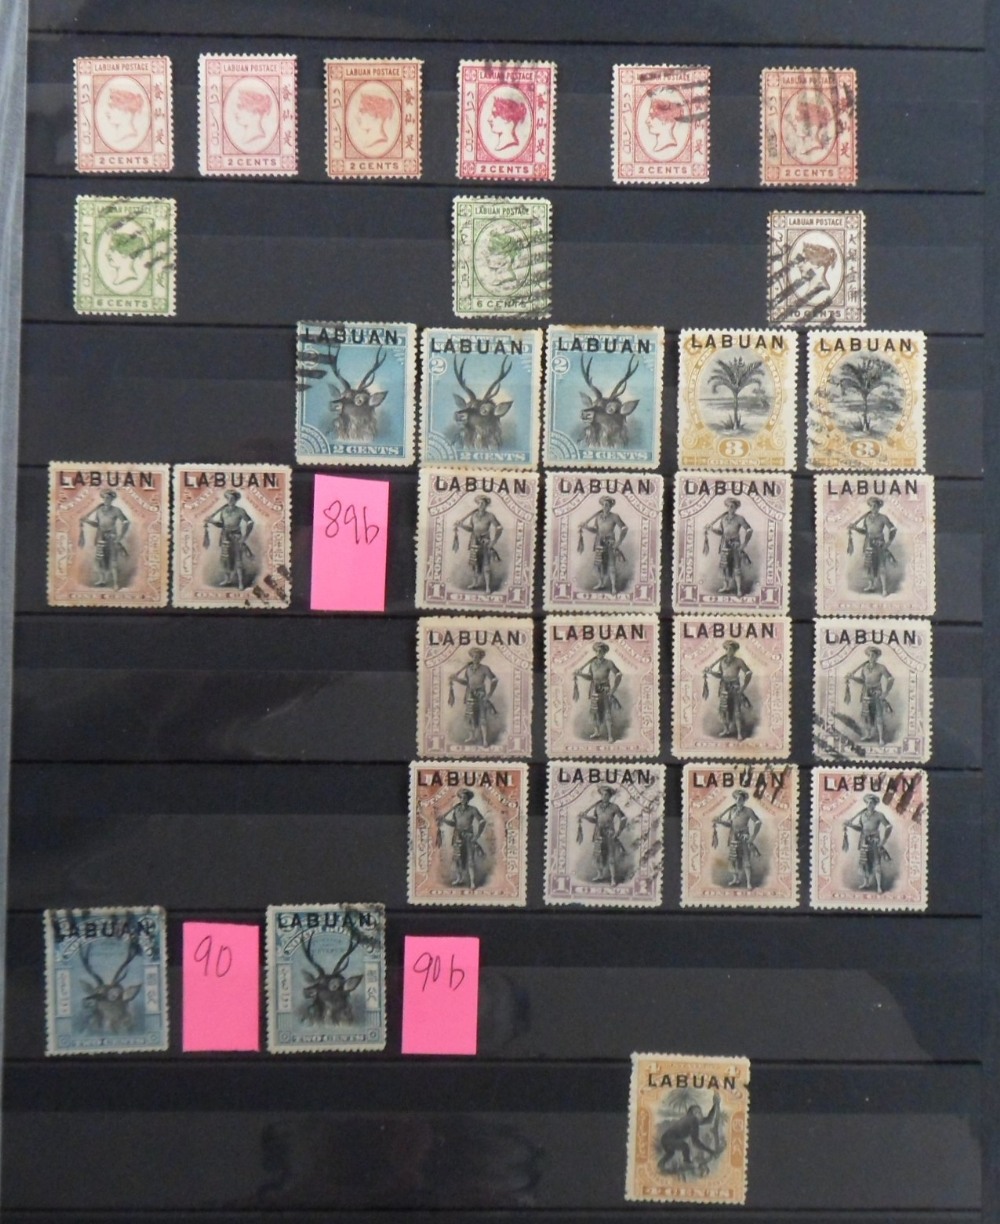 Stamps, North Borneo, Labuan, Sabah, Sarawak, Malay States and Straits Settlements duplicated - Image 2 of 6